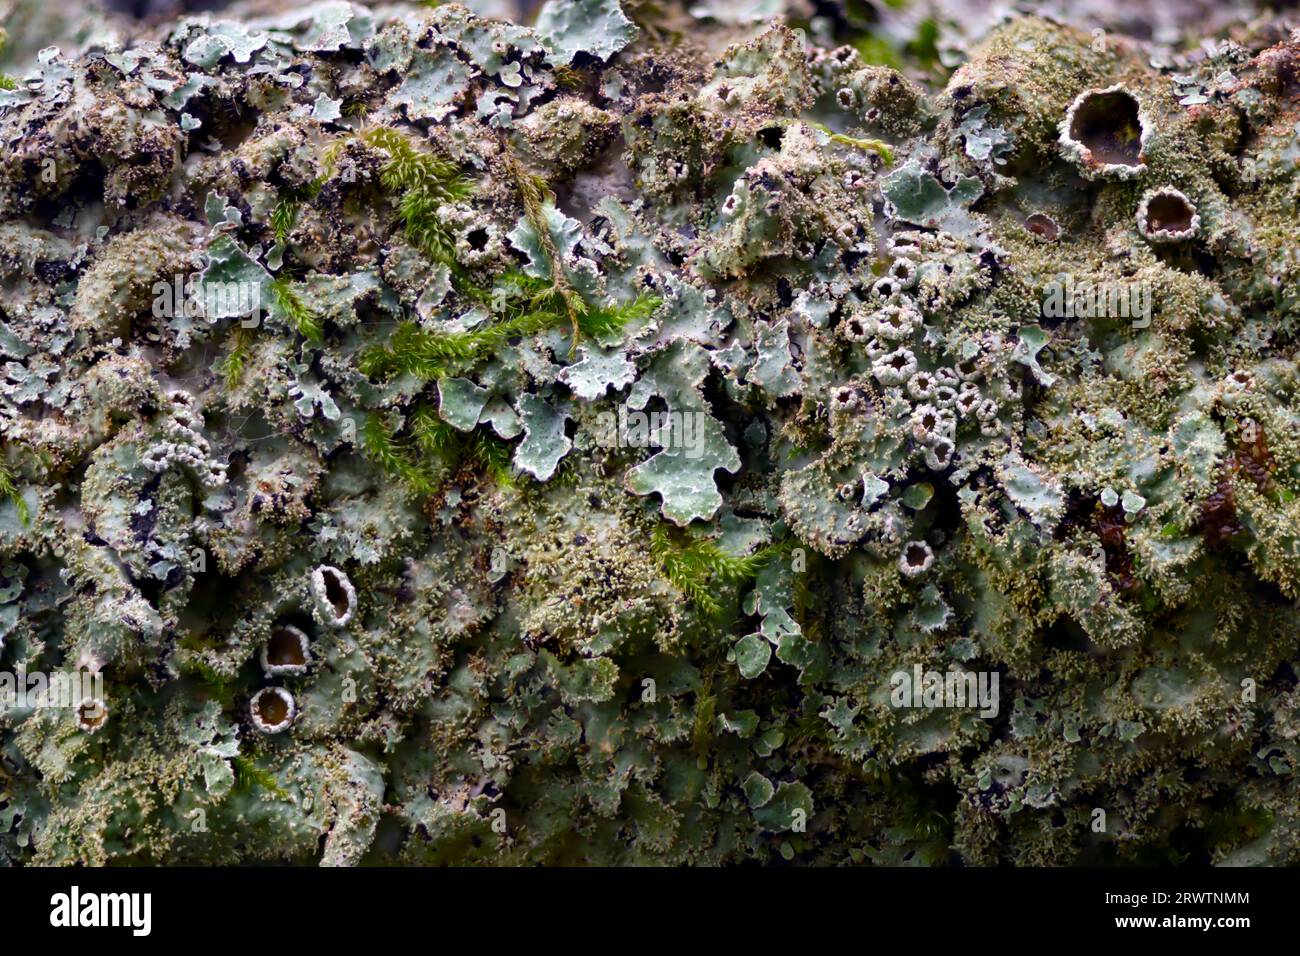 Varied rag lichen (Platismatia glauca) and other minute overgroing organisms on a decaying log at Hidra, south-western Norway in September. Stock Photo